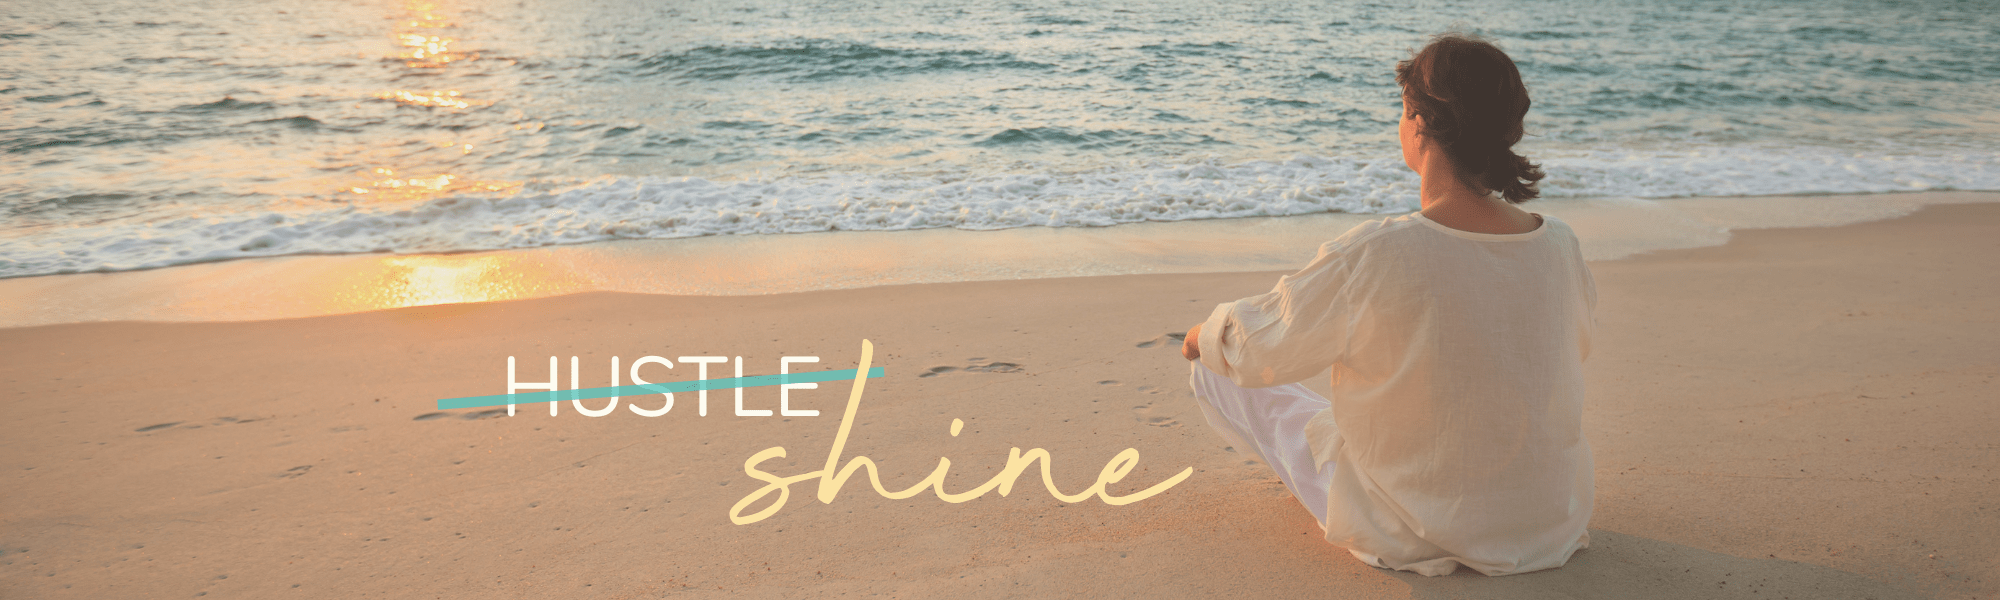 Woman sitting on the beach looking at the warm light of the sunset with the crossed out word hustle and the regular word shine